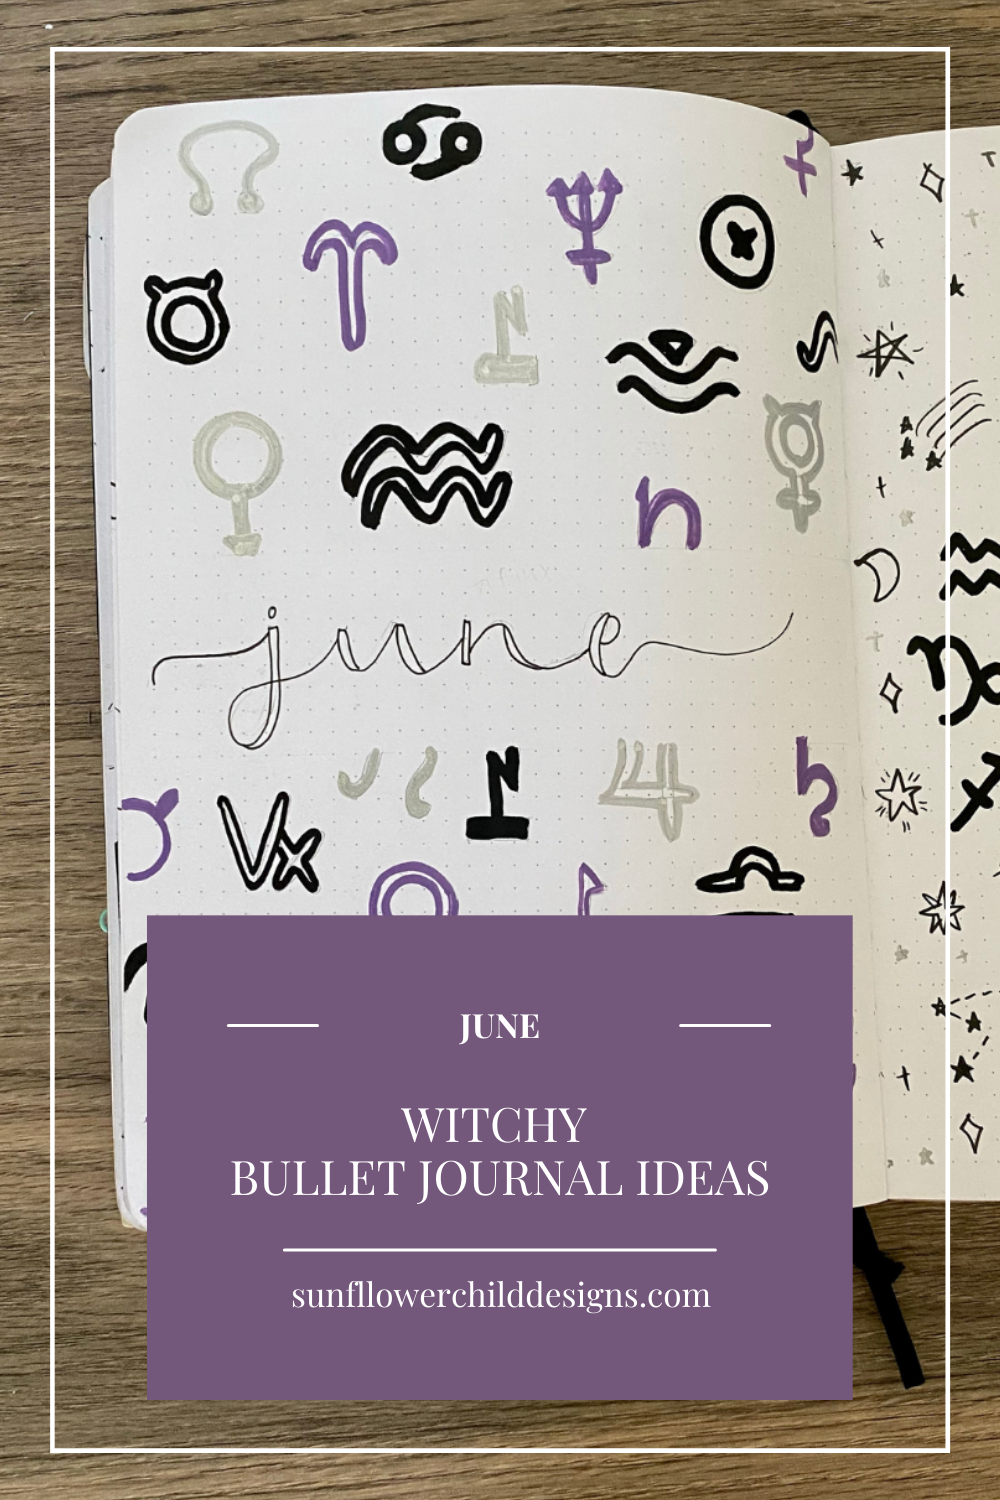 witchy-bullet-journal-ideas-june-bullet-journal-ideas 3.png